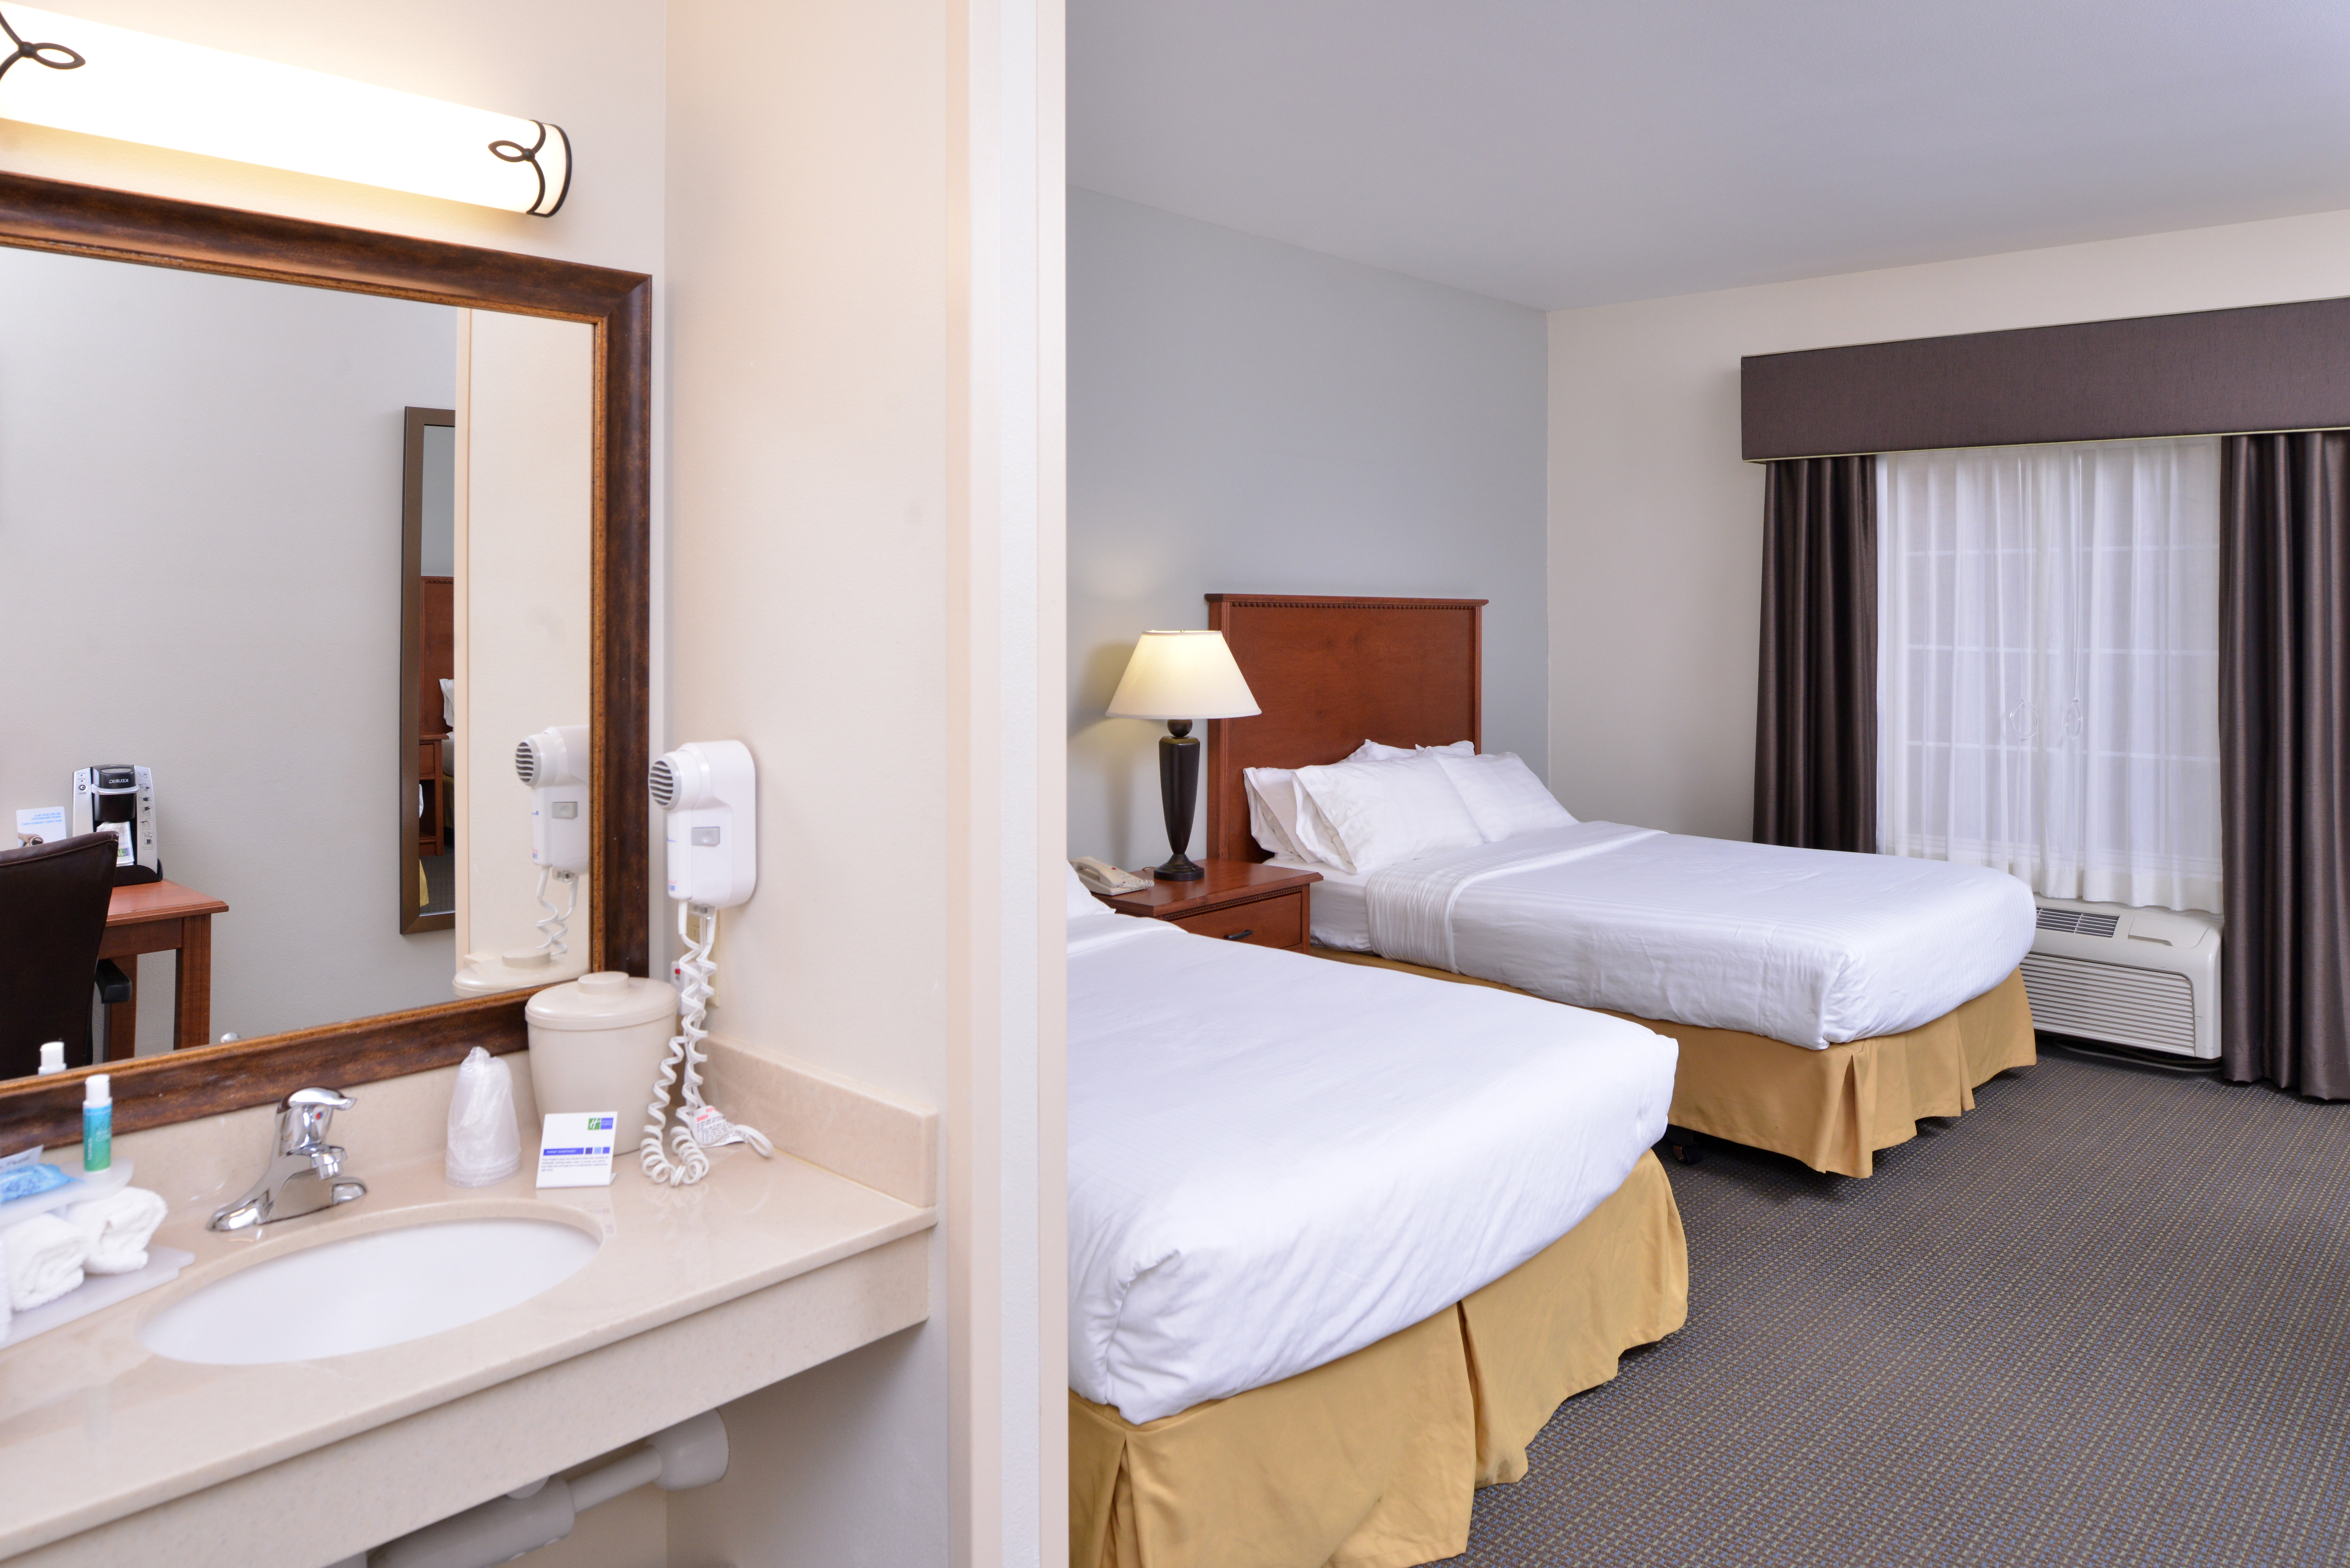 Relax and refresh in our spacious guestroom.